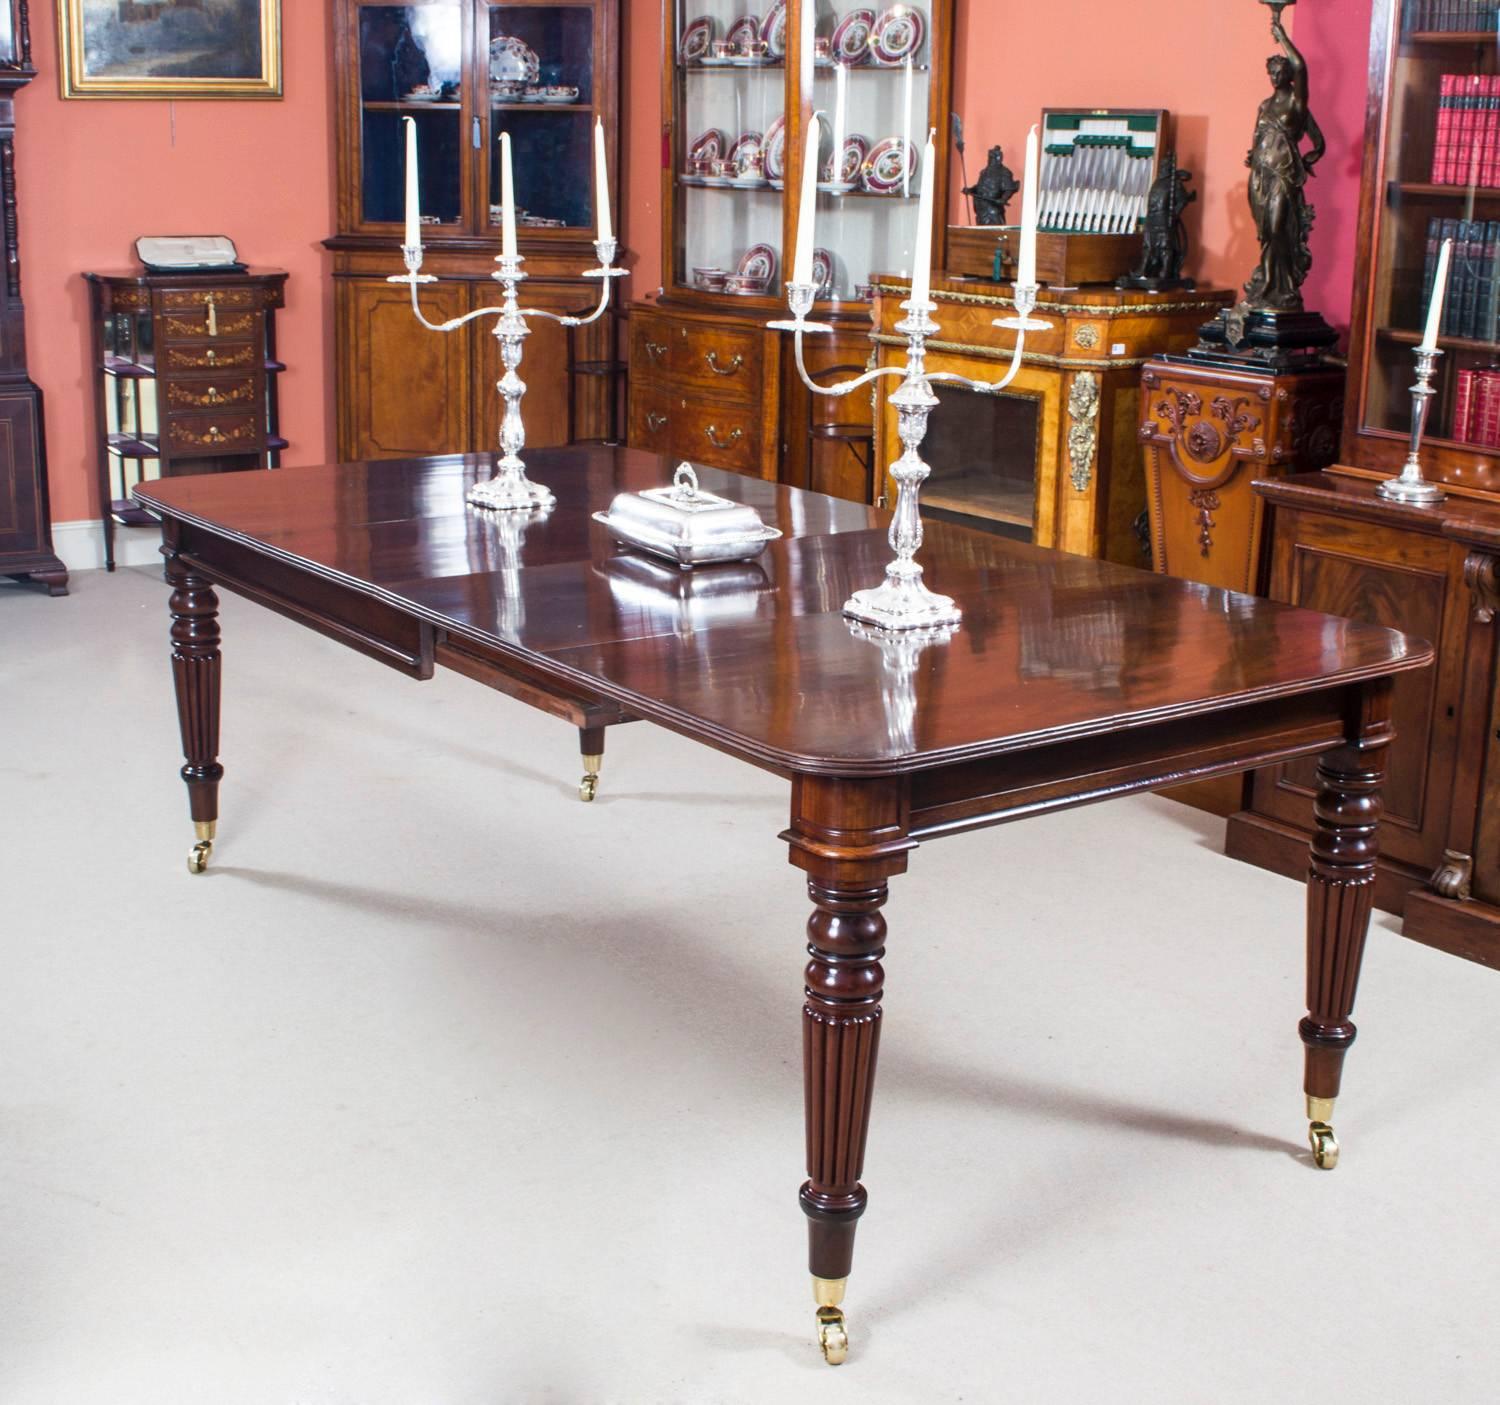 A very rare opportunity to own an antique English Regency dining room table, circa 1820 in date, which can seat eight people in comfort. 

The table is made of beautiful solid flame mahogany, has a winding mechanism and two leaves that can be